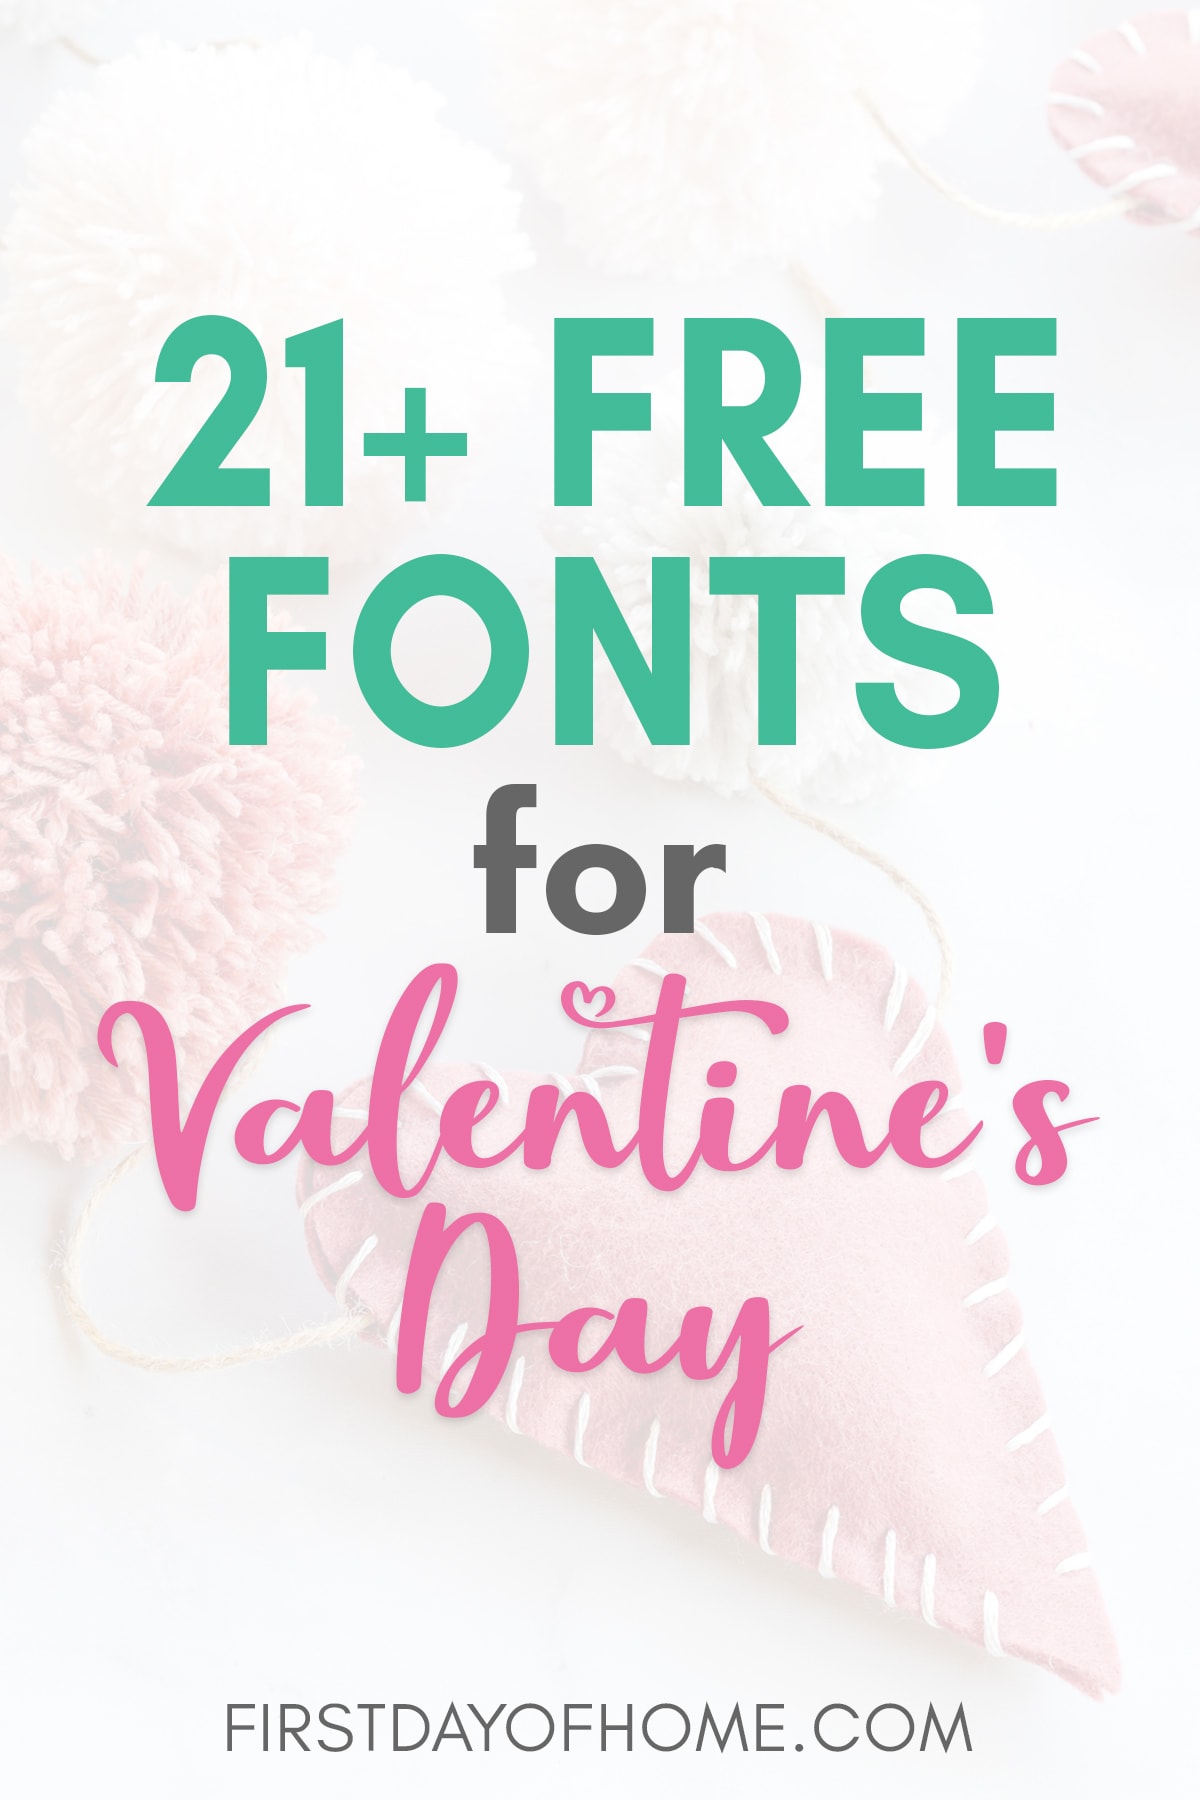 Image of felt heart garland in the background with text overlay reading "21+ Free Fonts for Valentine's Day"